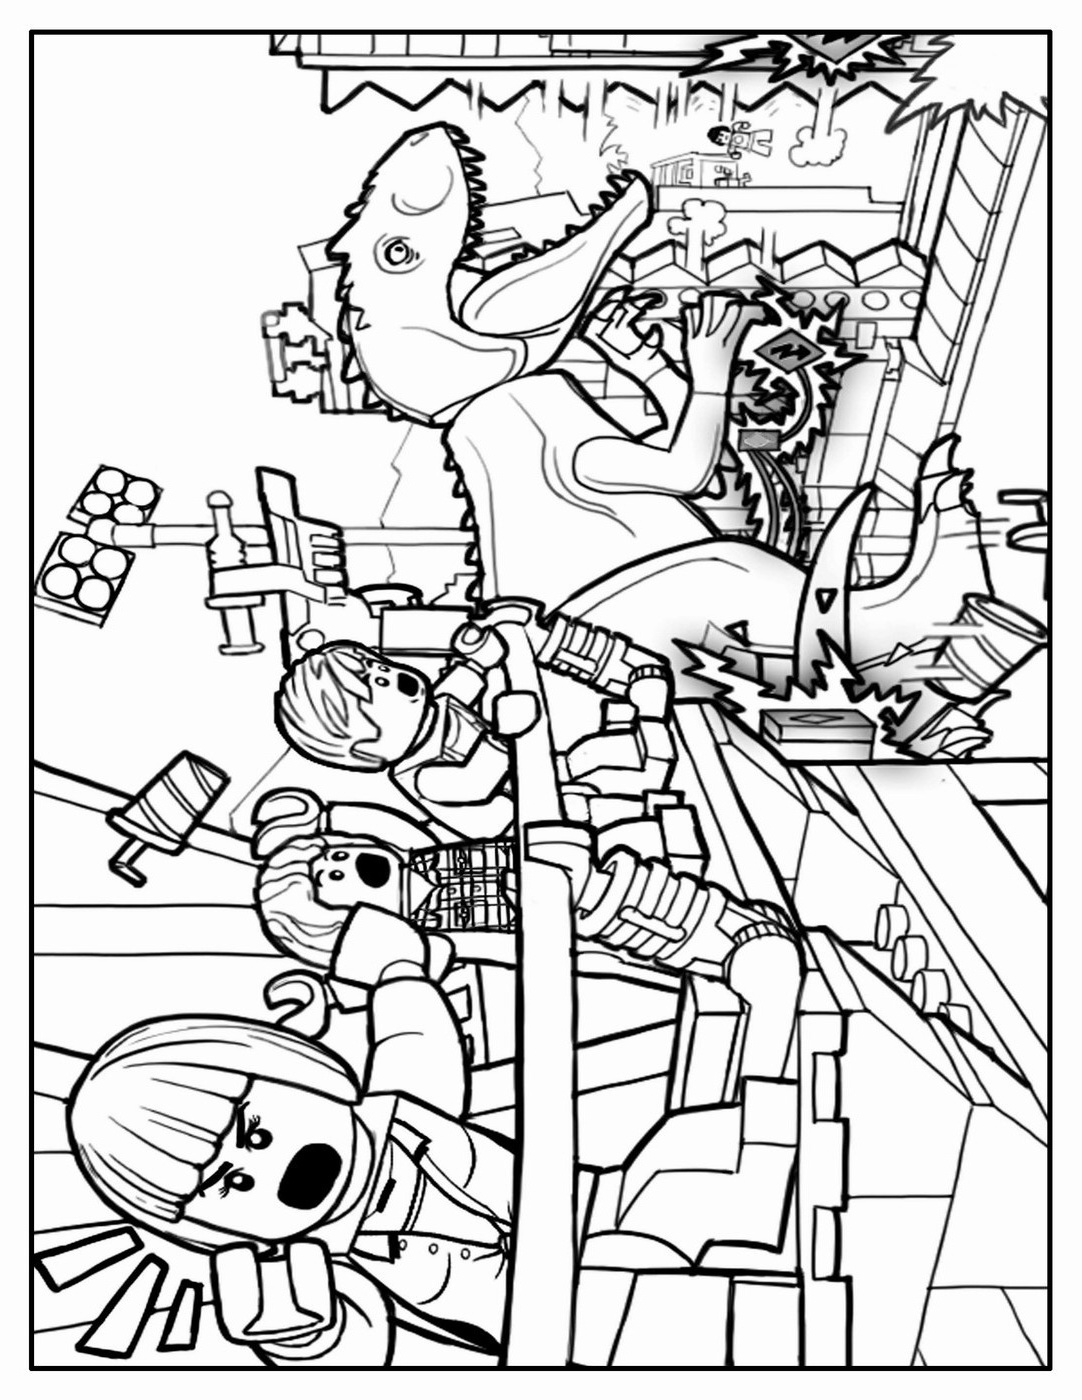 Coloriage Lego Jurassic World Impressionnant Images Lego Jurassic World Coloring Pages Coloring Pages